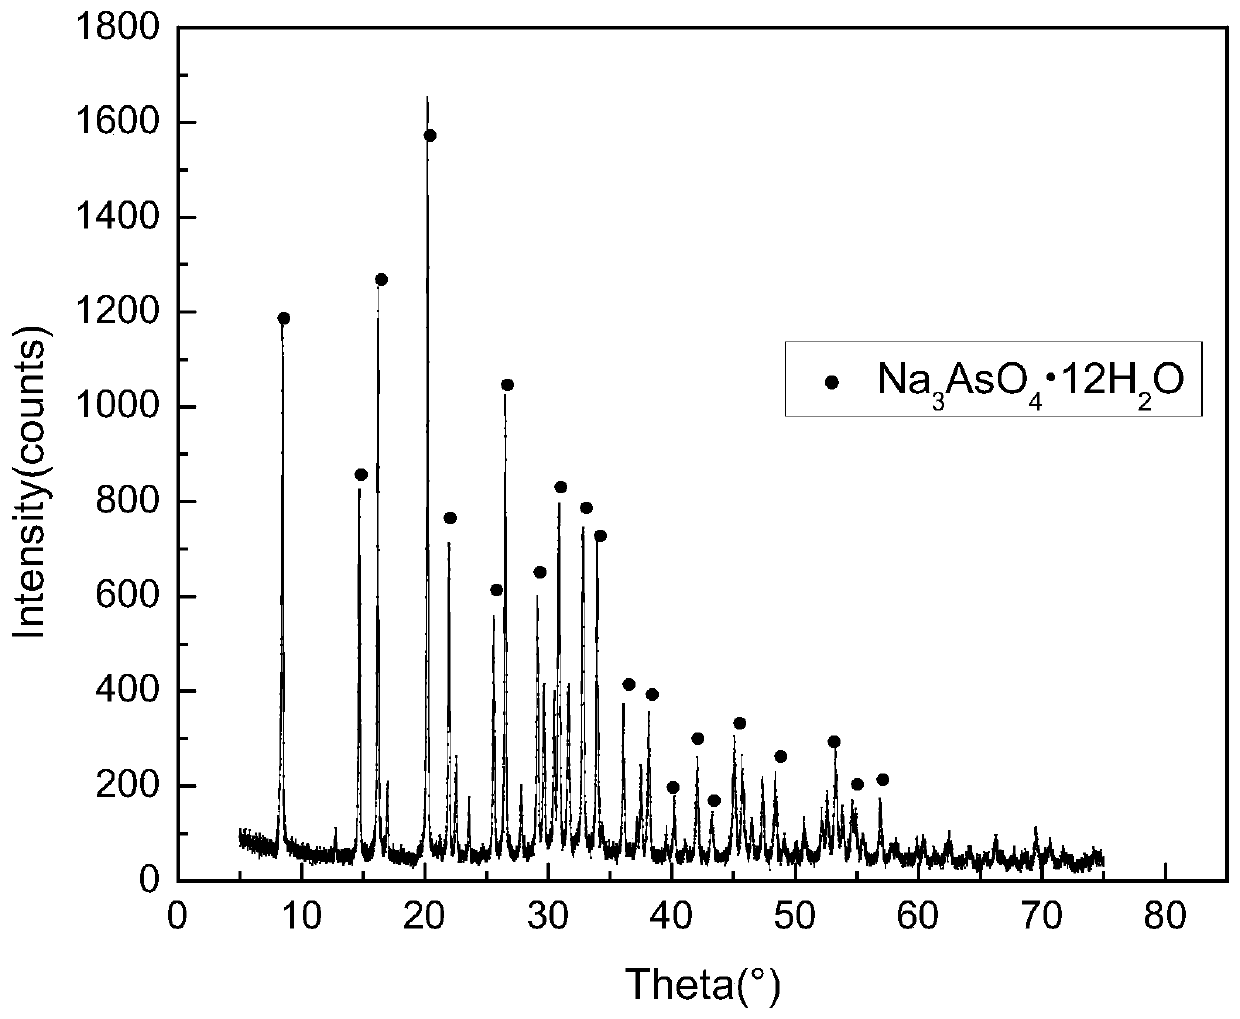 A method for extracting arsenic from arsenic-containing nickel-cobalt slag and preparing arsenate